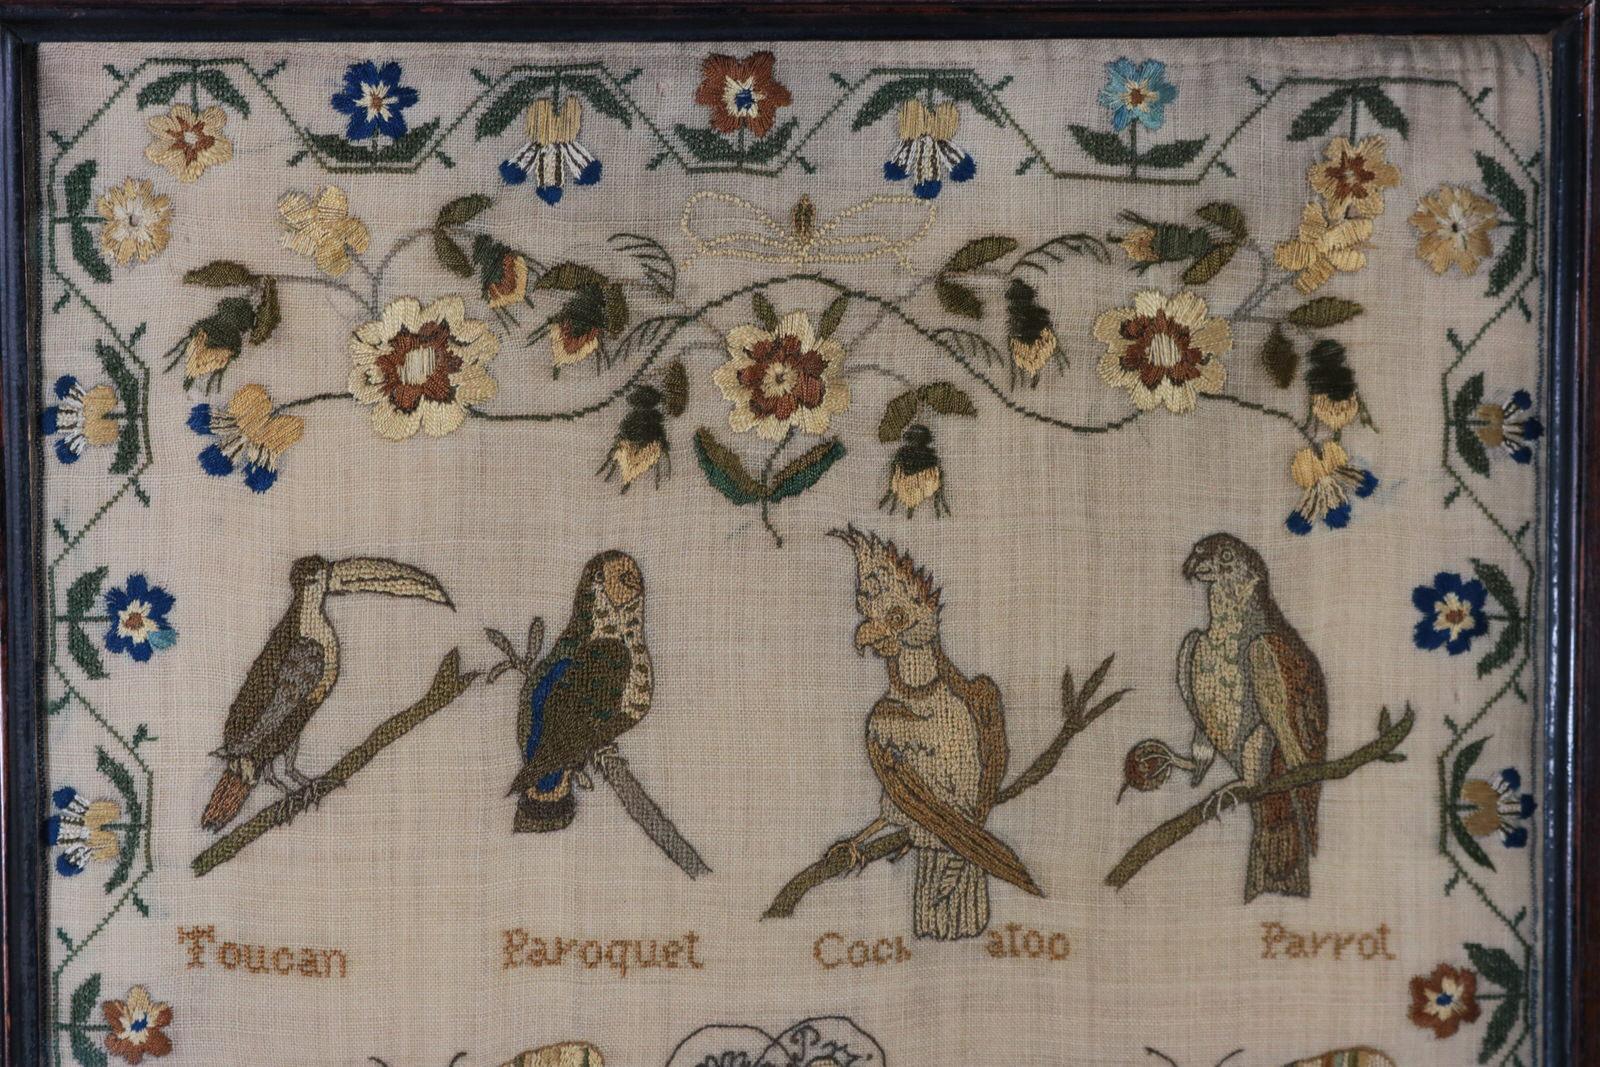 Sampler by Hannah Prince stitched in 1834. The sampler is worked in silk on linen ground, in a variety of fine stitches. Meandering floral border and wreath of extraordinary variety and detail. Colours blue, yellow, green, pale green, light brown,